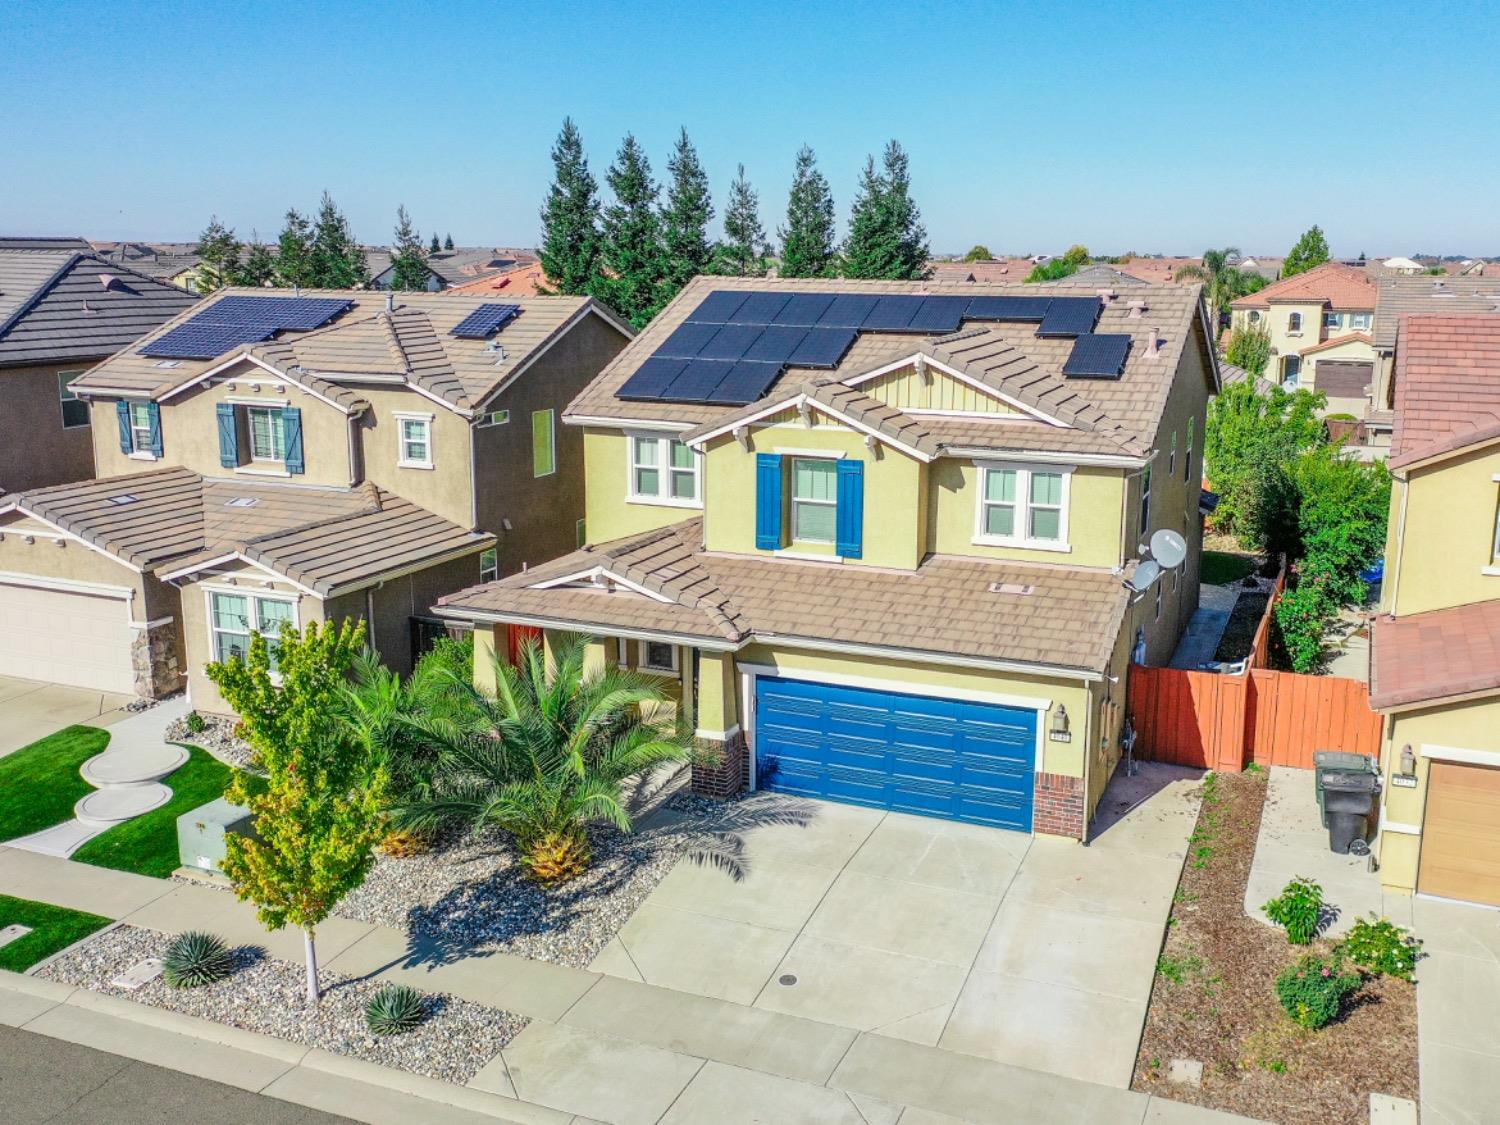 Photo of 4040 Weathervane Wy in Roseville, CA